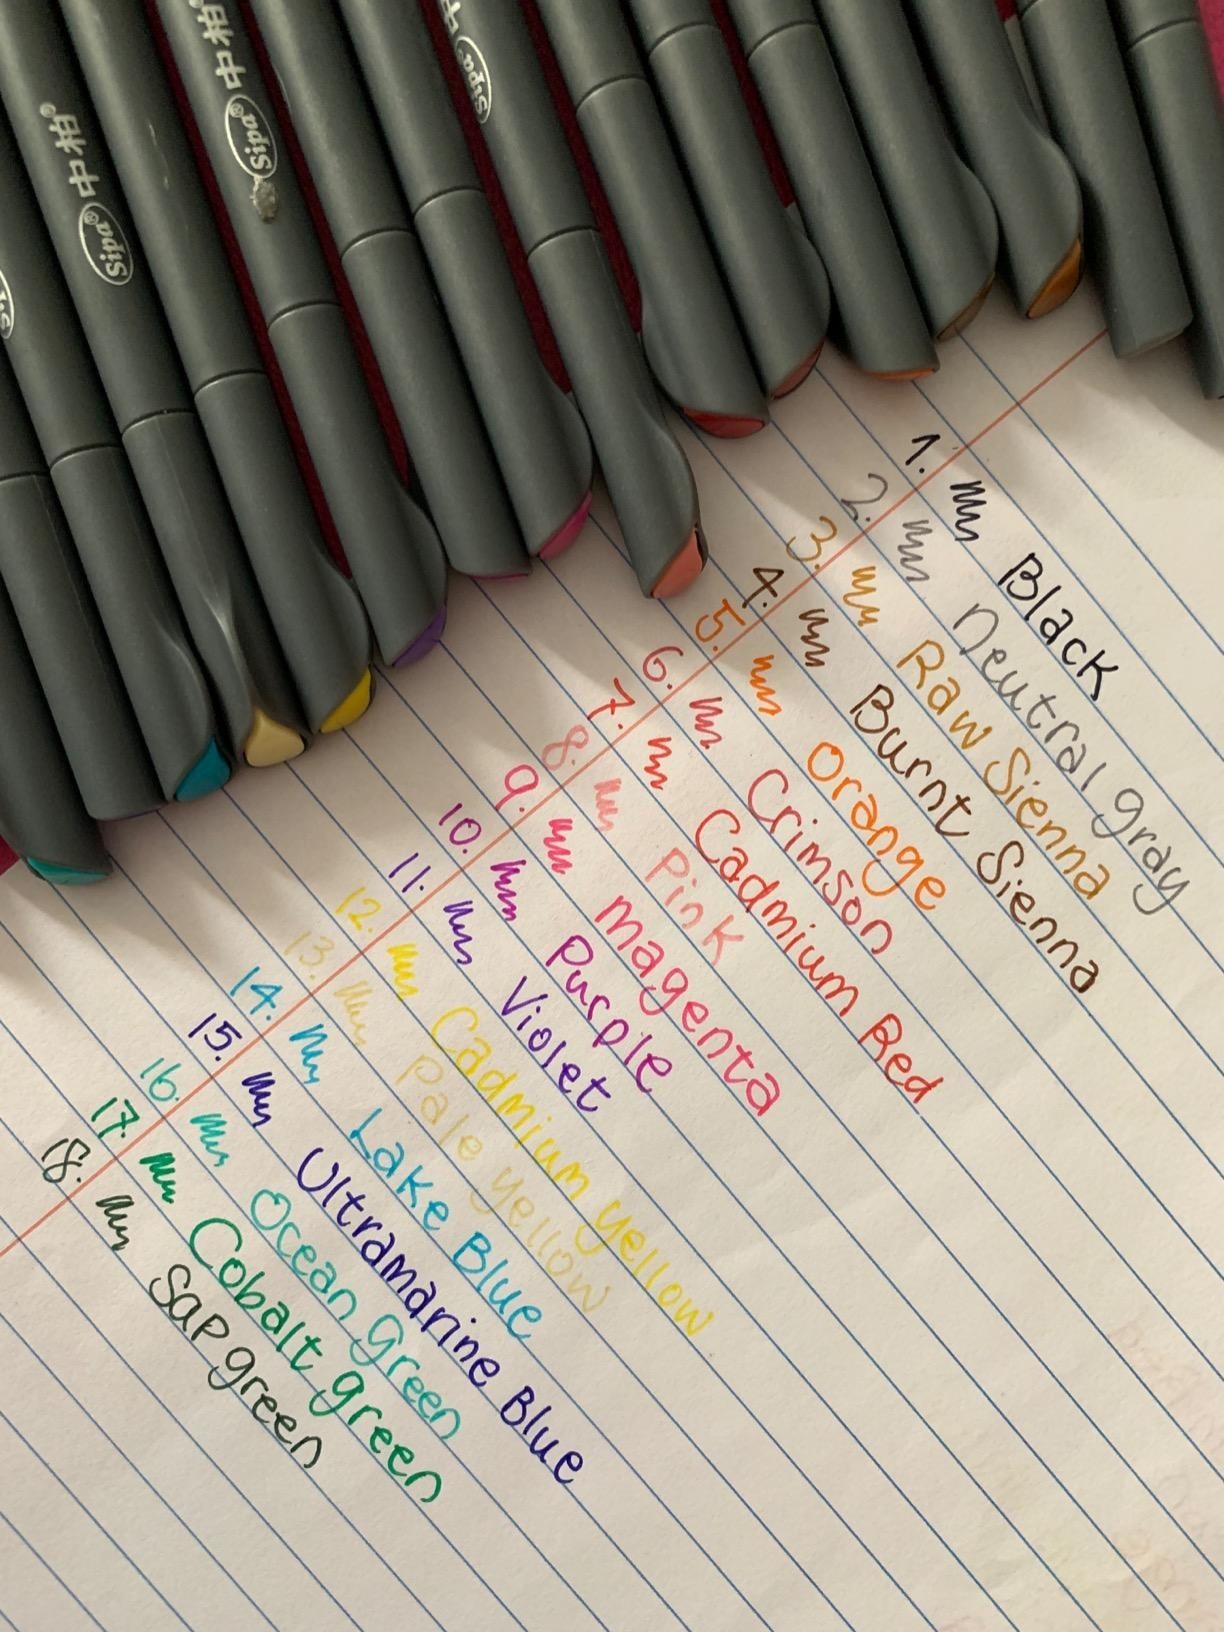 The pens on a written page demonstrating the color/thickness of the ink